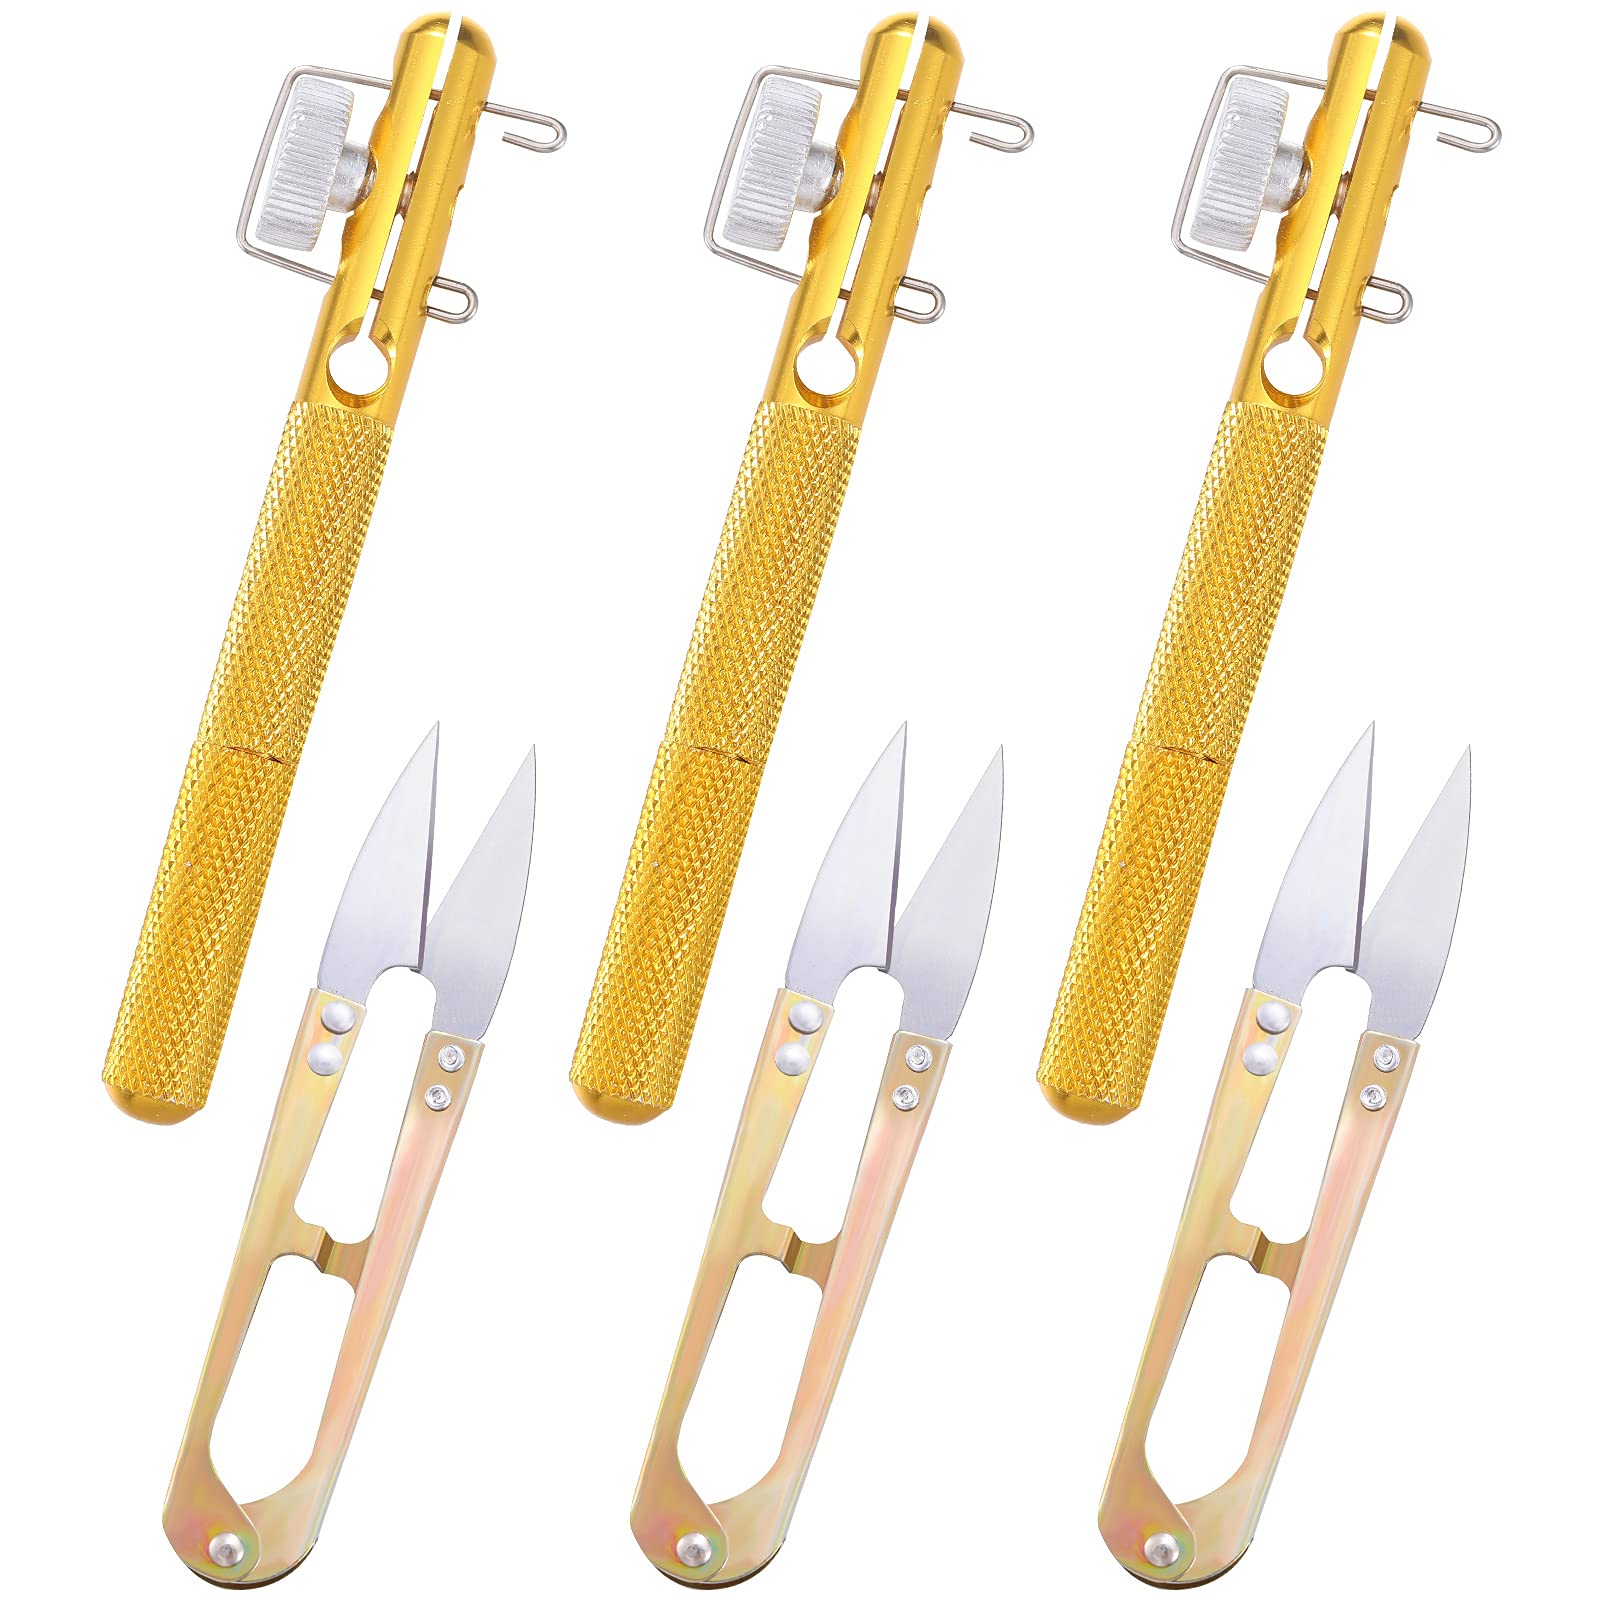 3 Pieces Fishing Practical Knot Line Tying Knotting Tool and 3 Pieces  U-Shaped Scissors, Manual